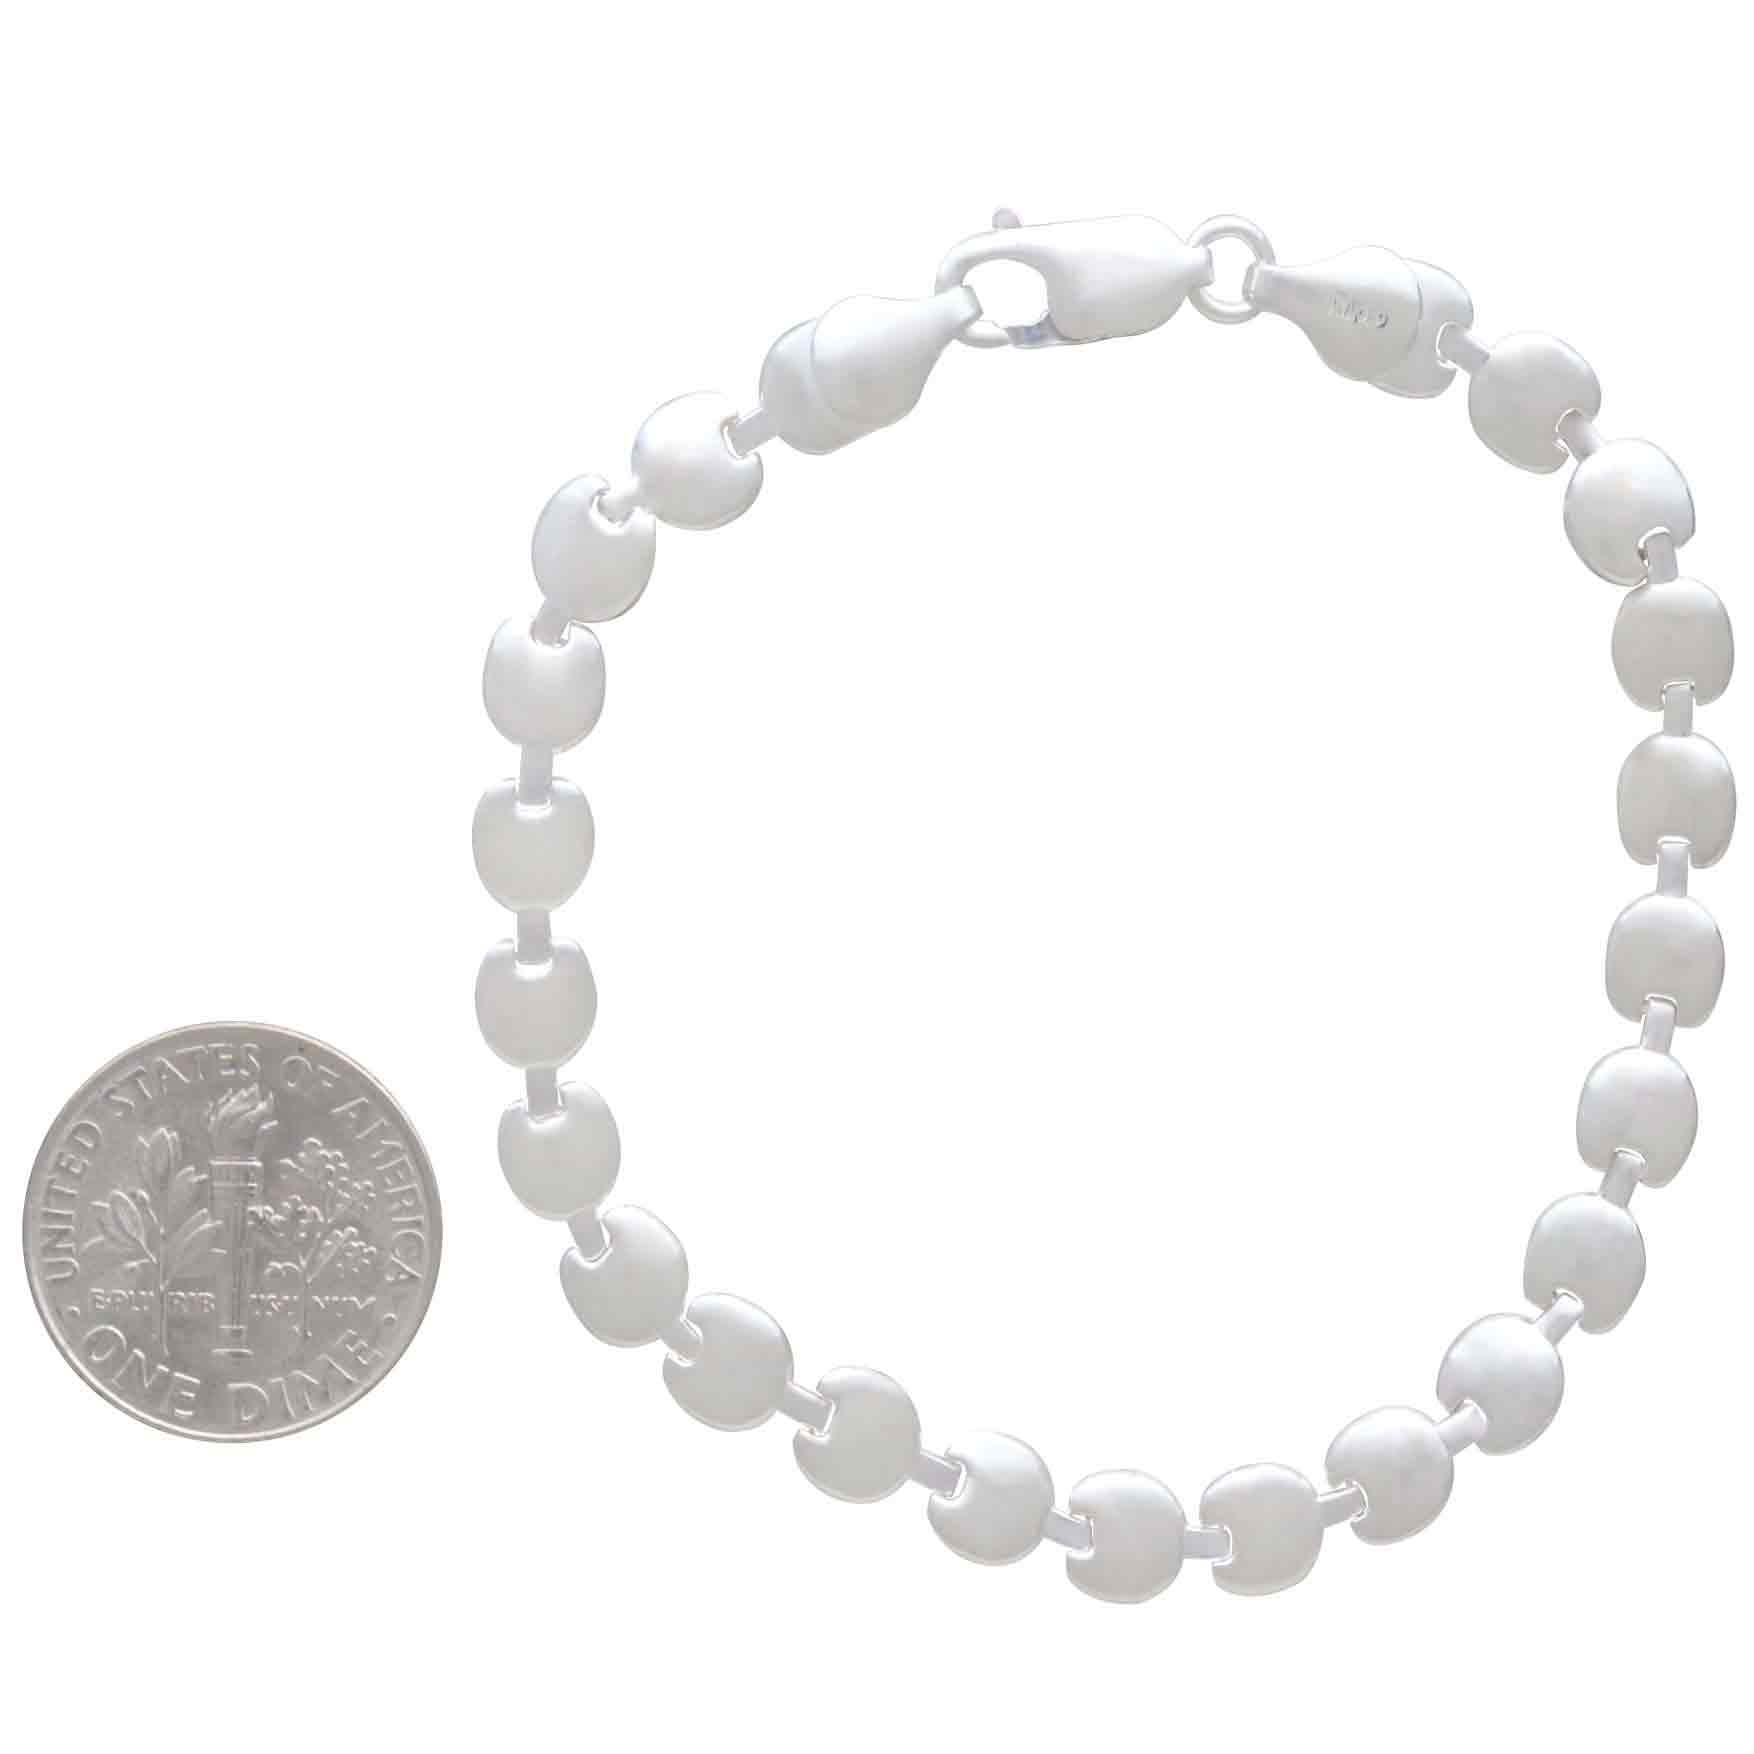 Sterling Silver Round Discs Bracelet 7.5 Inches